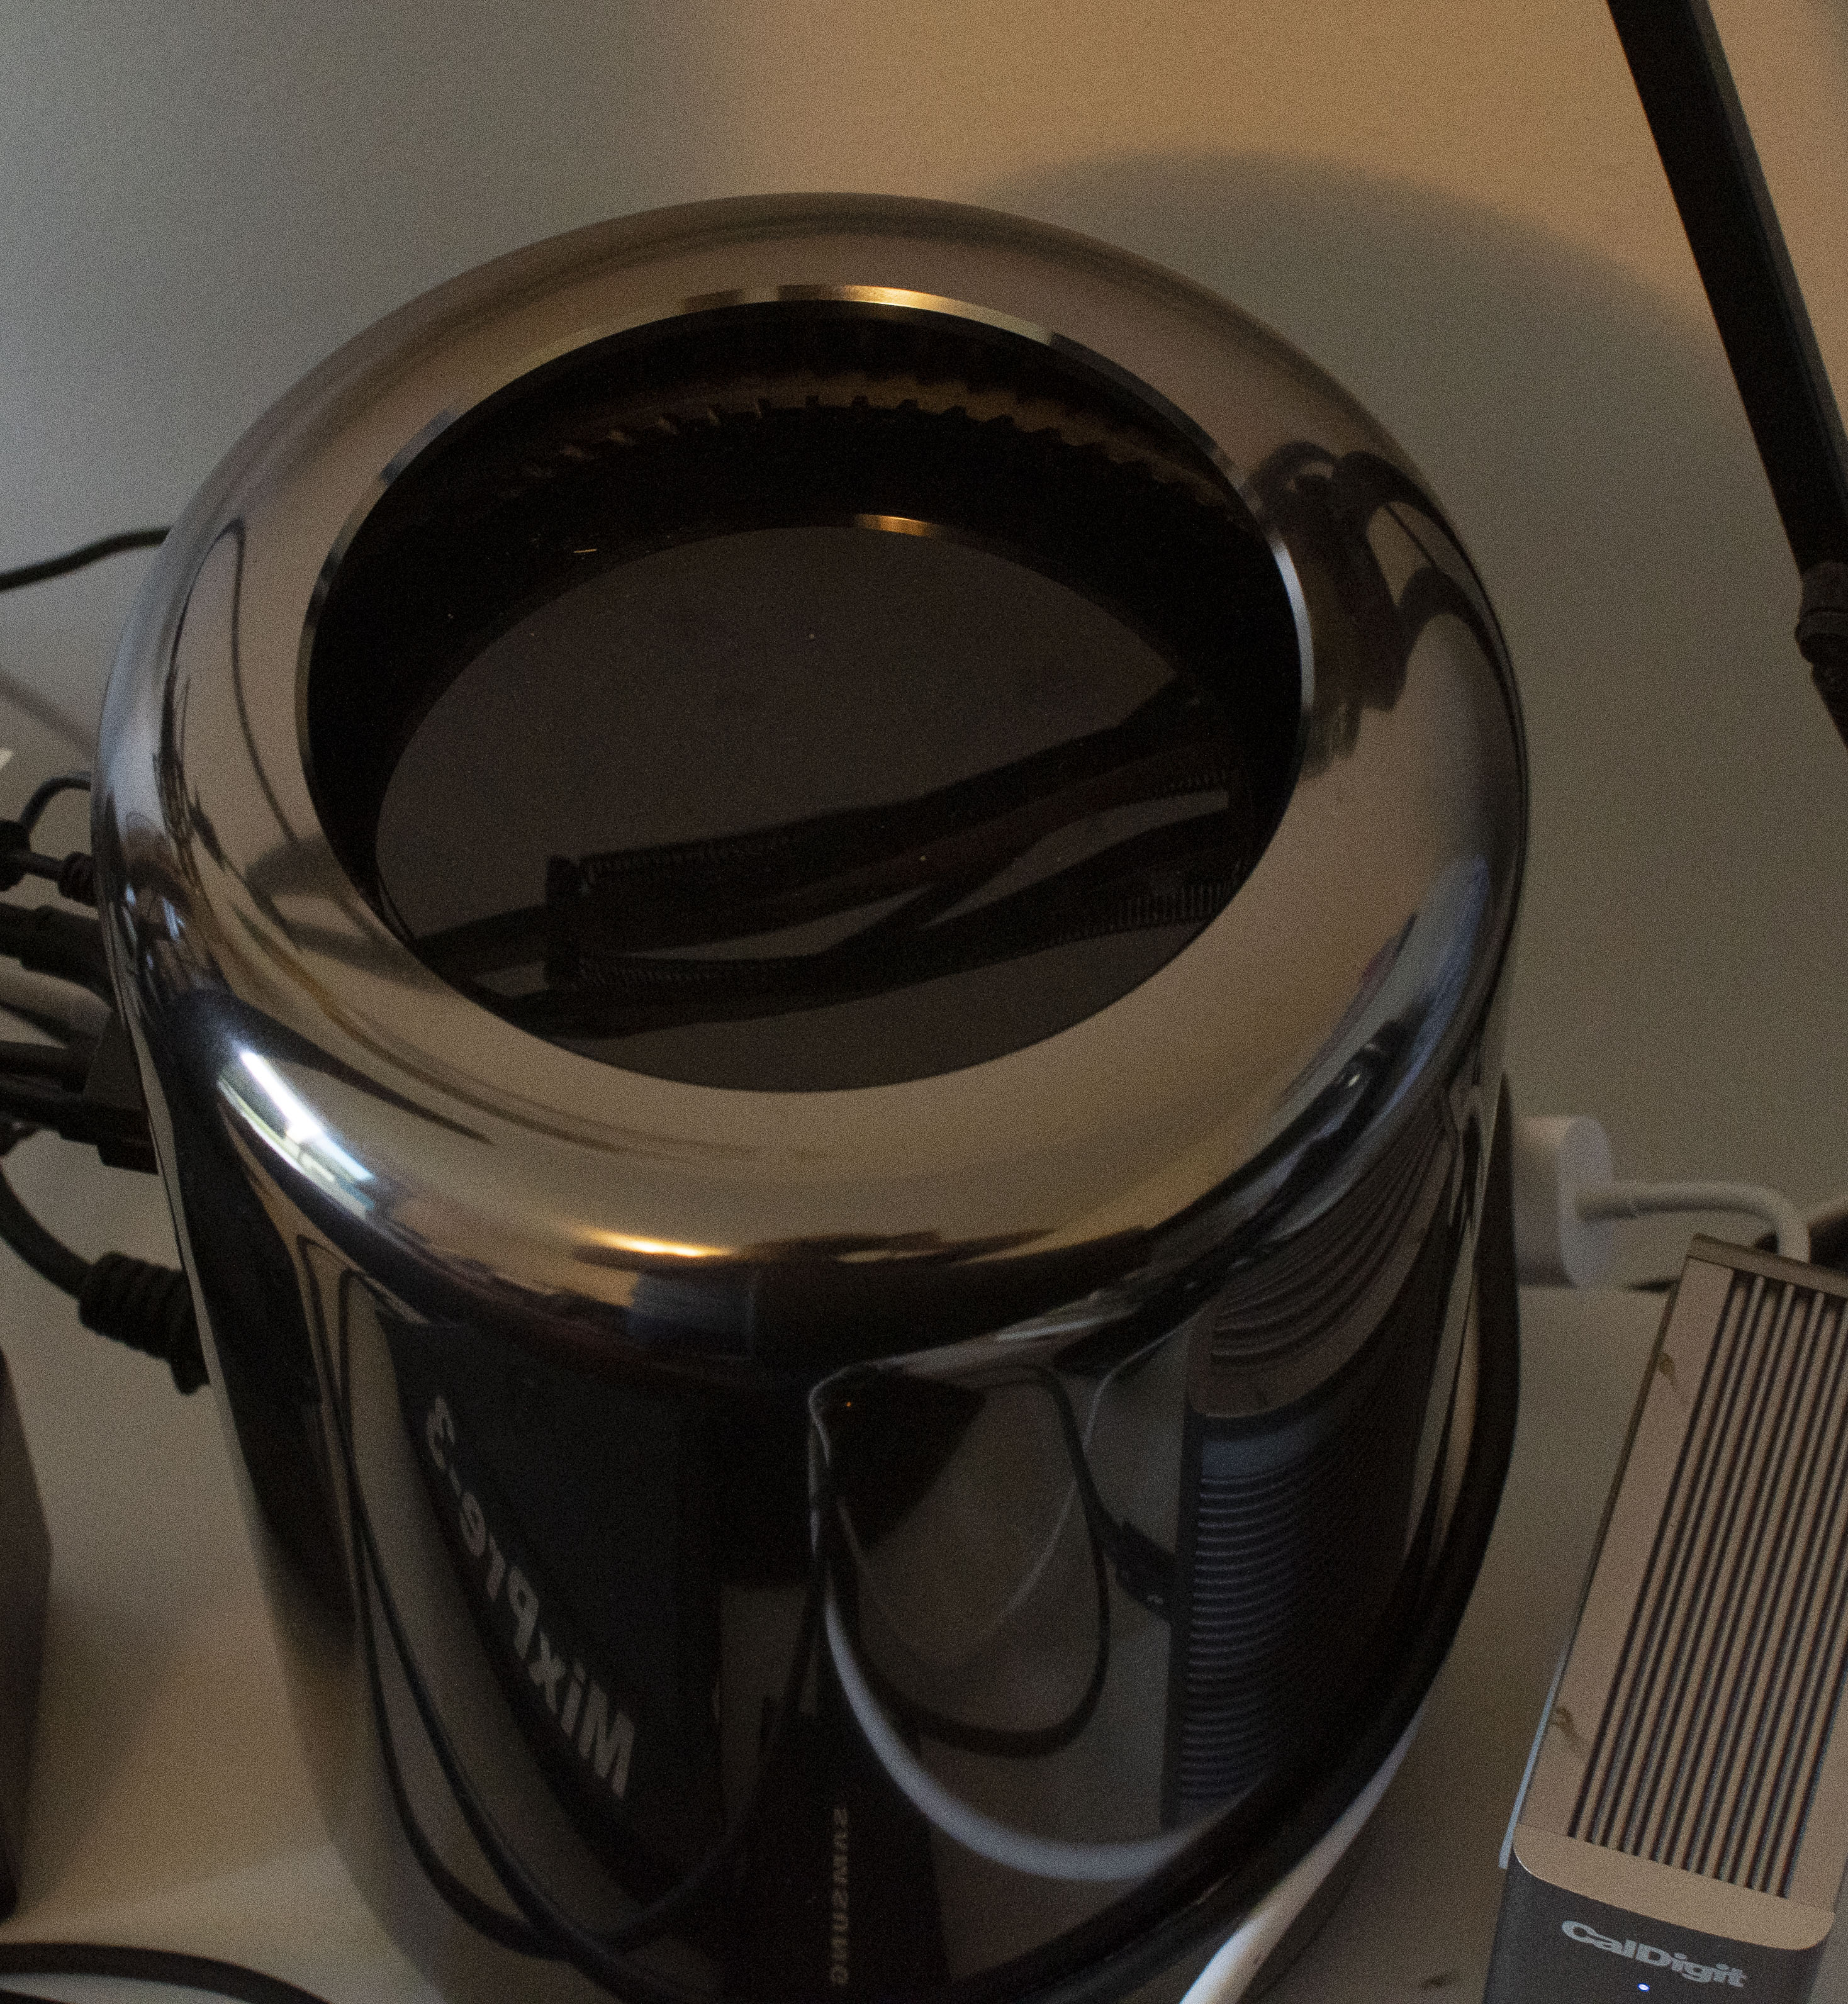 Top View of the Mac Pro